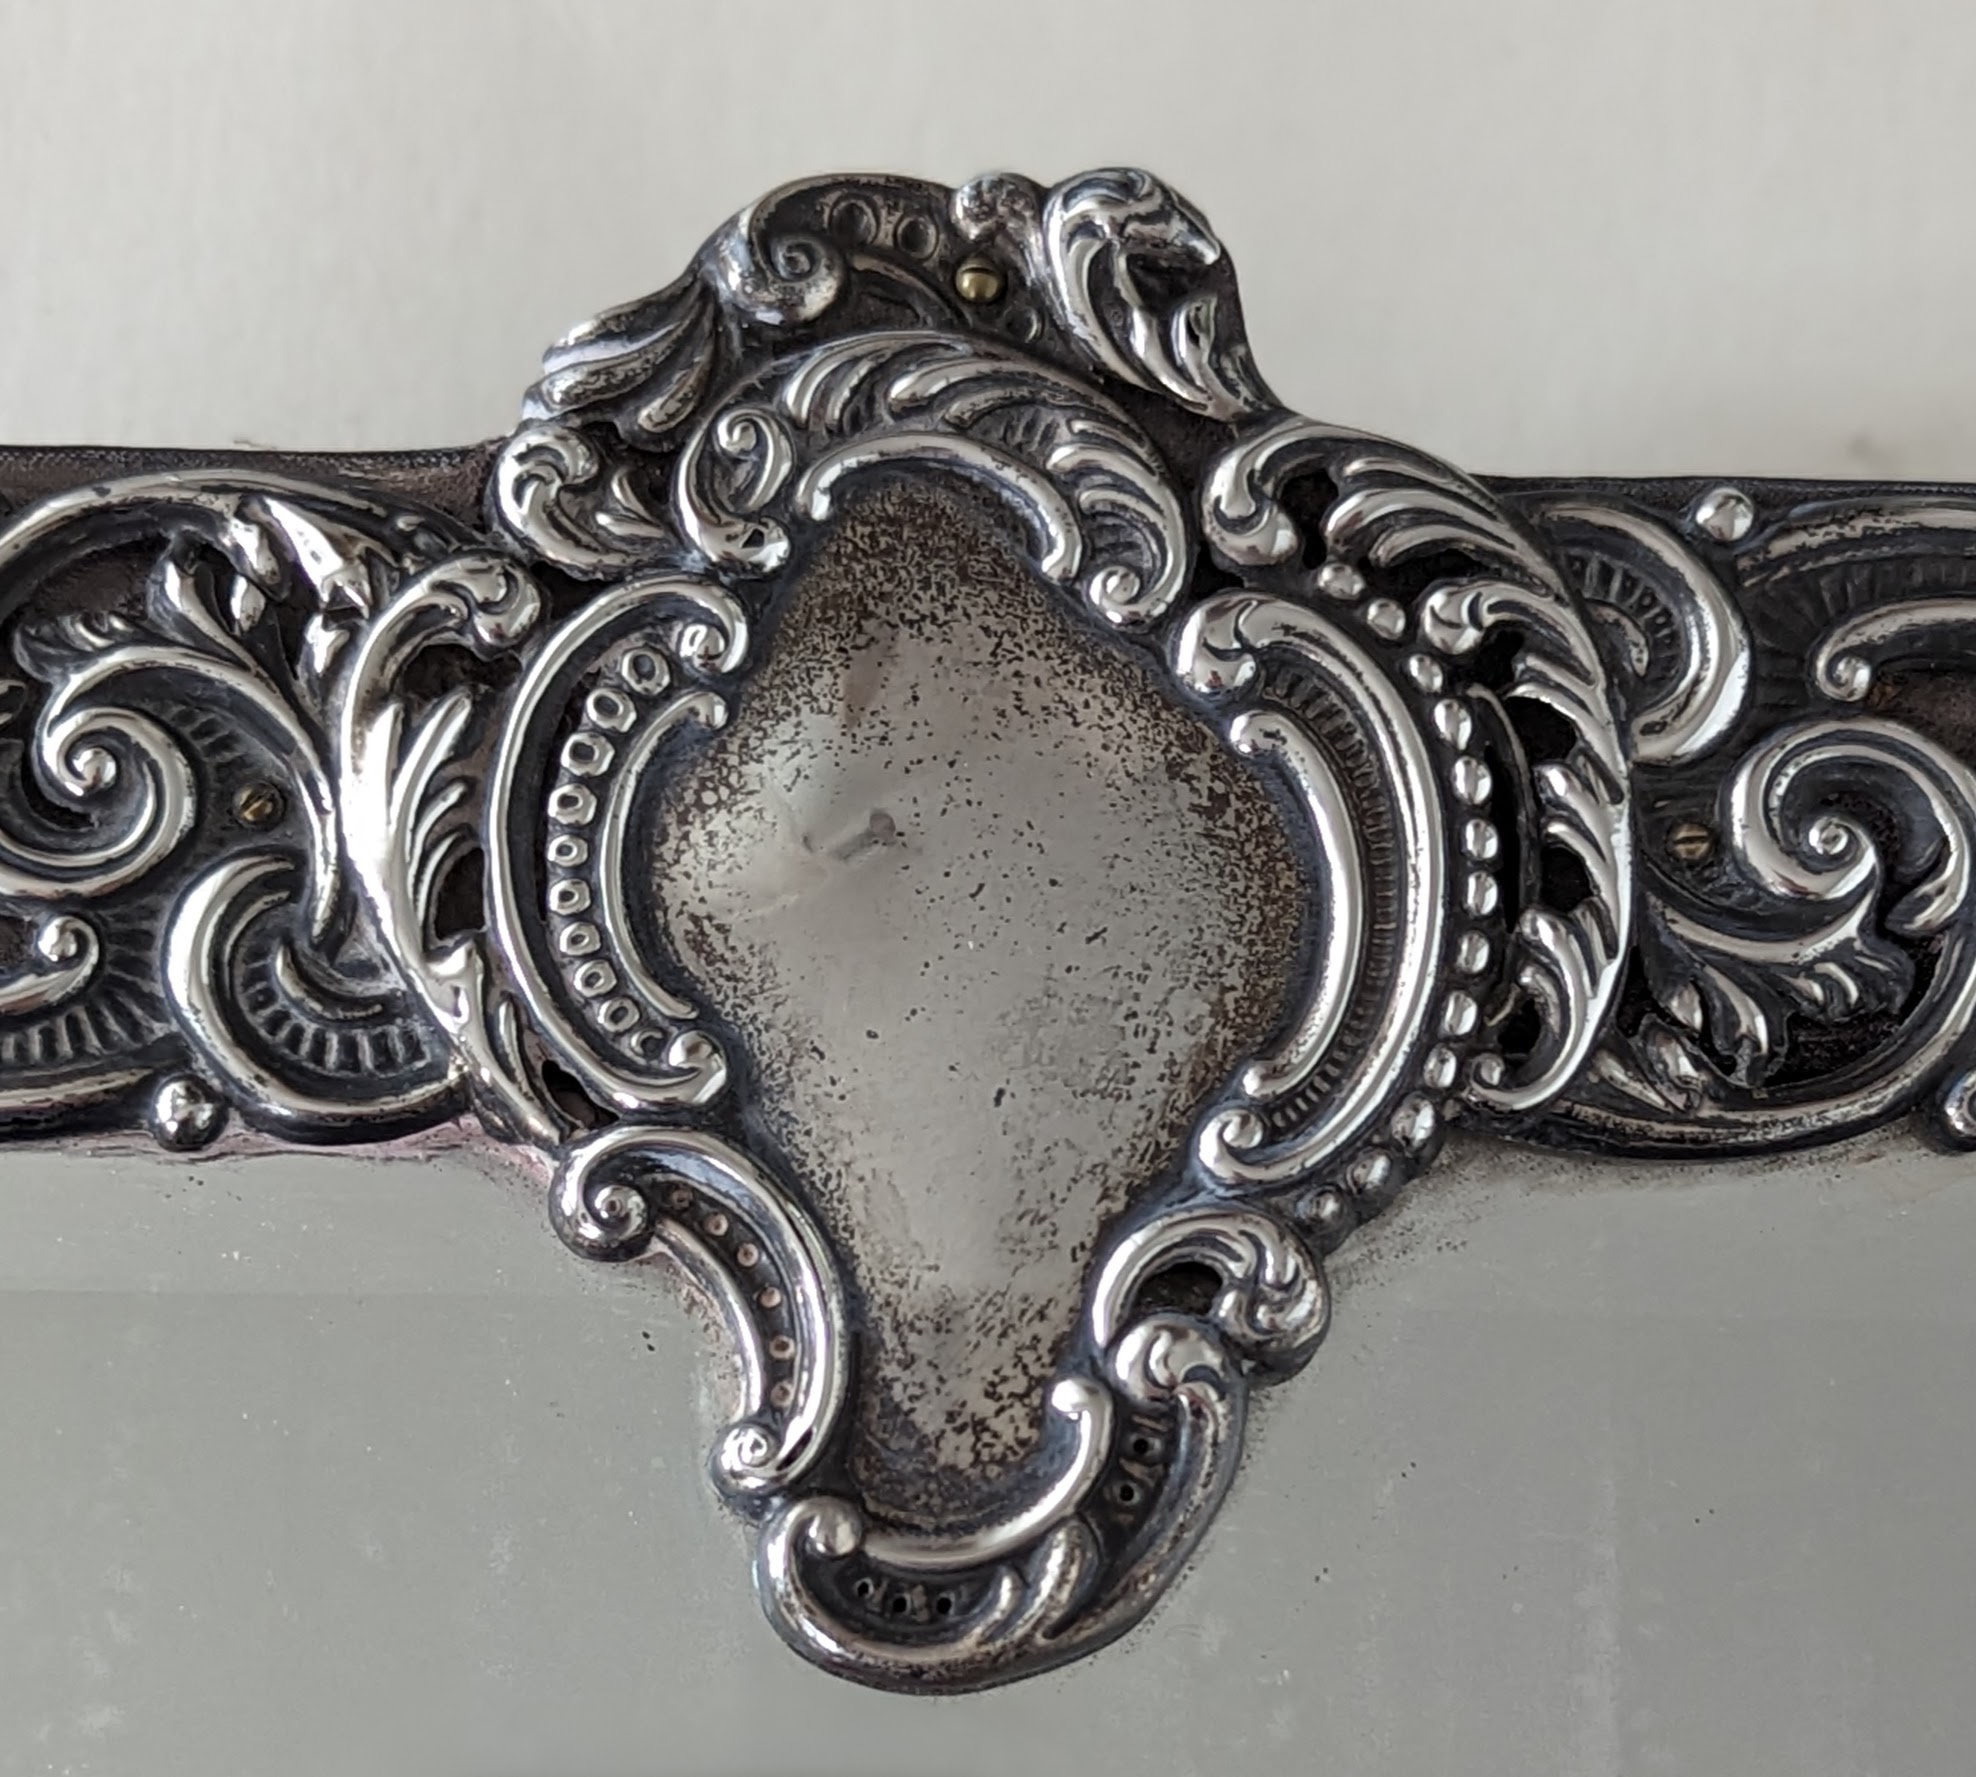 An Edwardian silver-framed table mirror with profuse pierced rococo decoration - Image 3 of 6